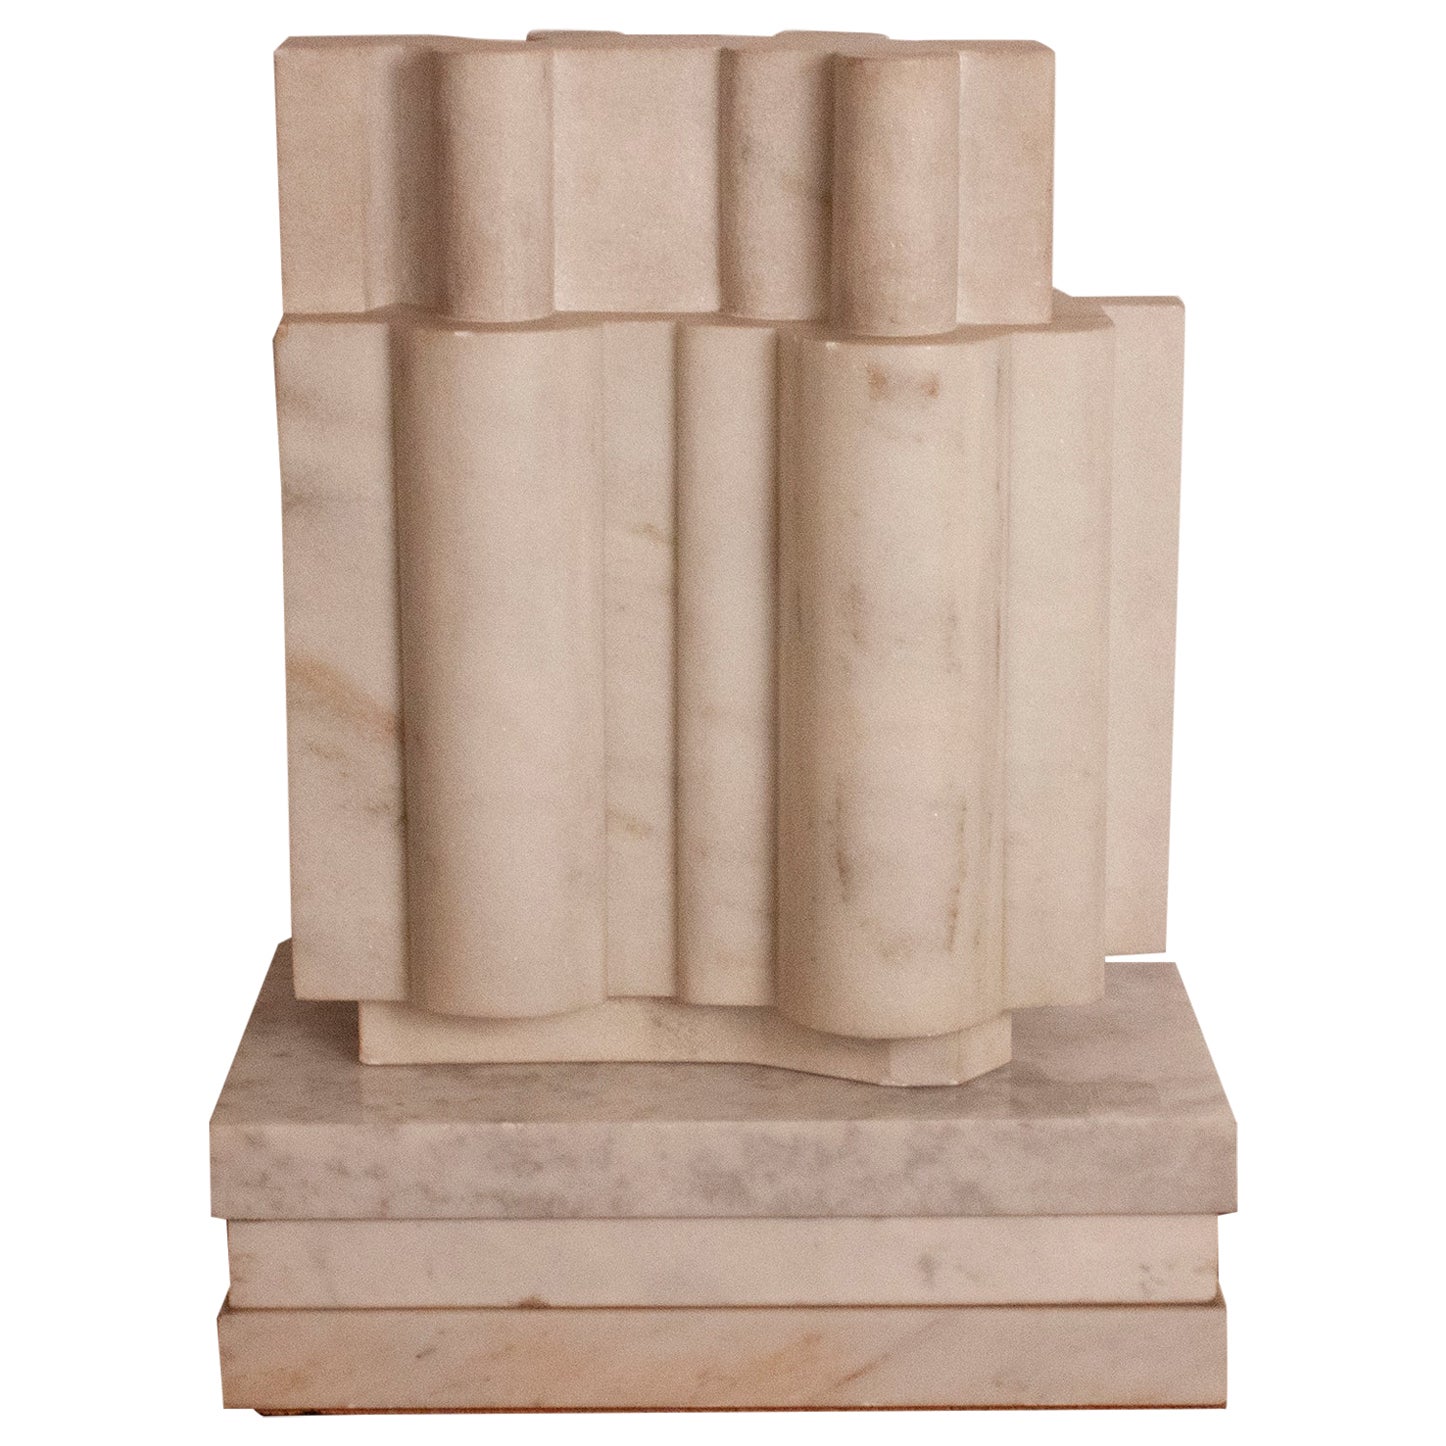 Abstract Sculpture in Marble, in the Style of Eduardo Chillida, 1970s For Sale